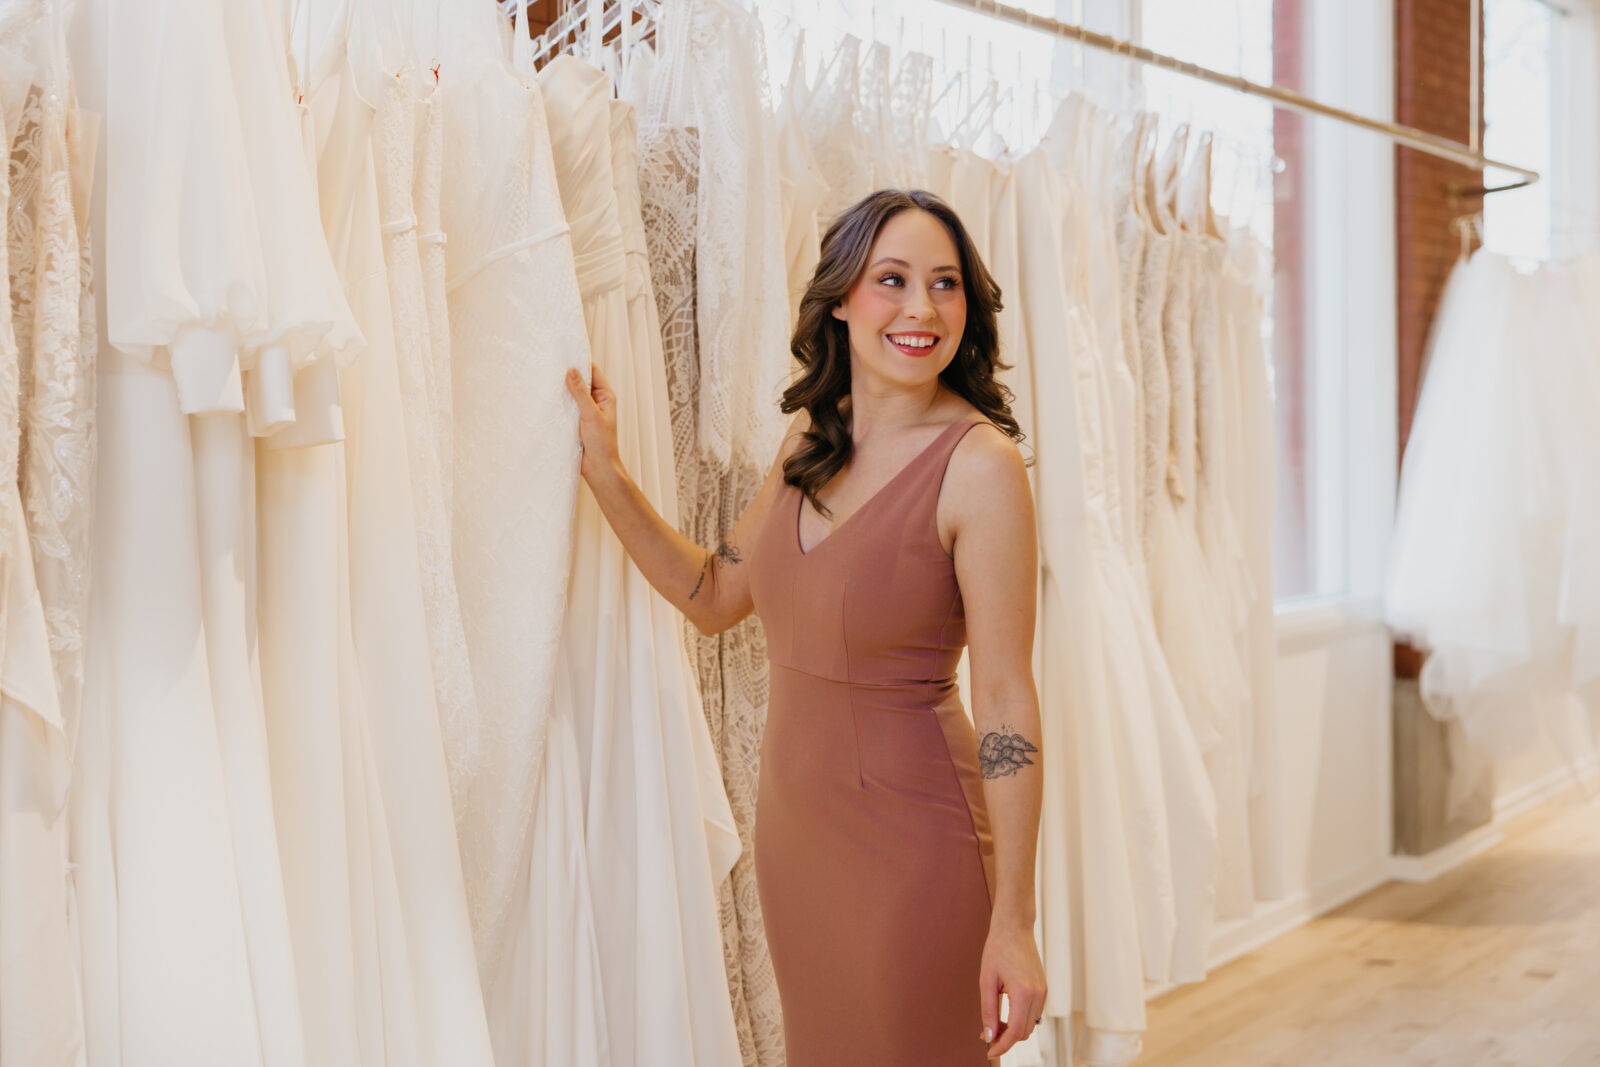 Minneapolis Bridal Gowns at Vow'd weddings